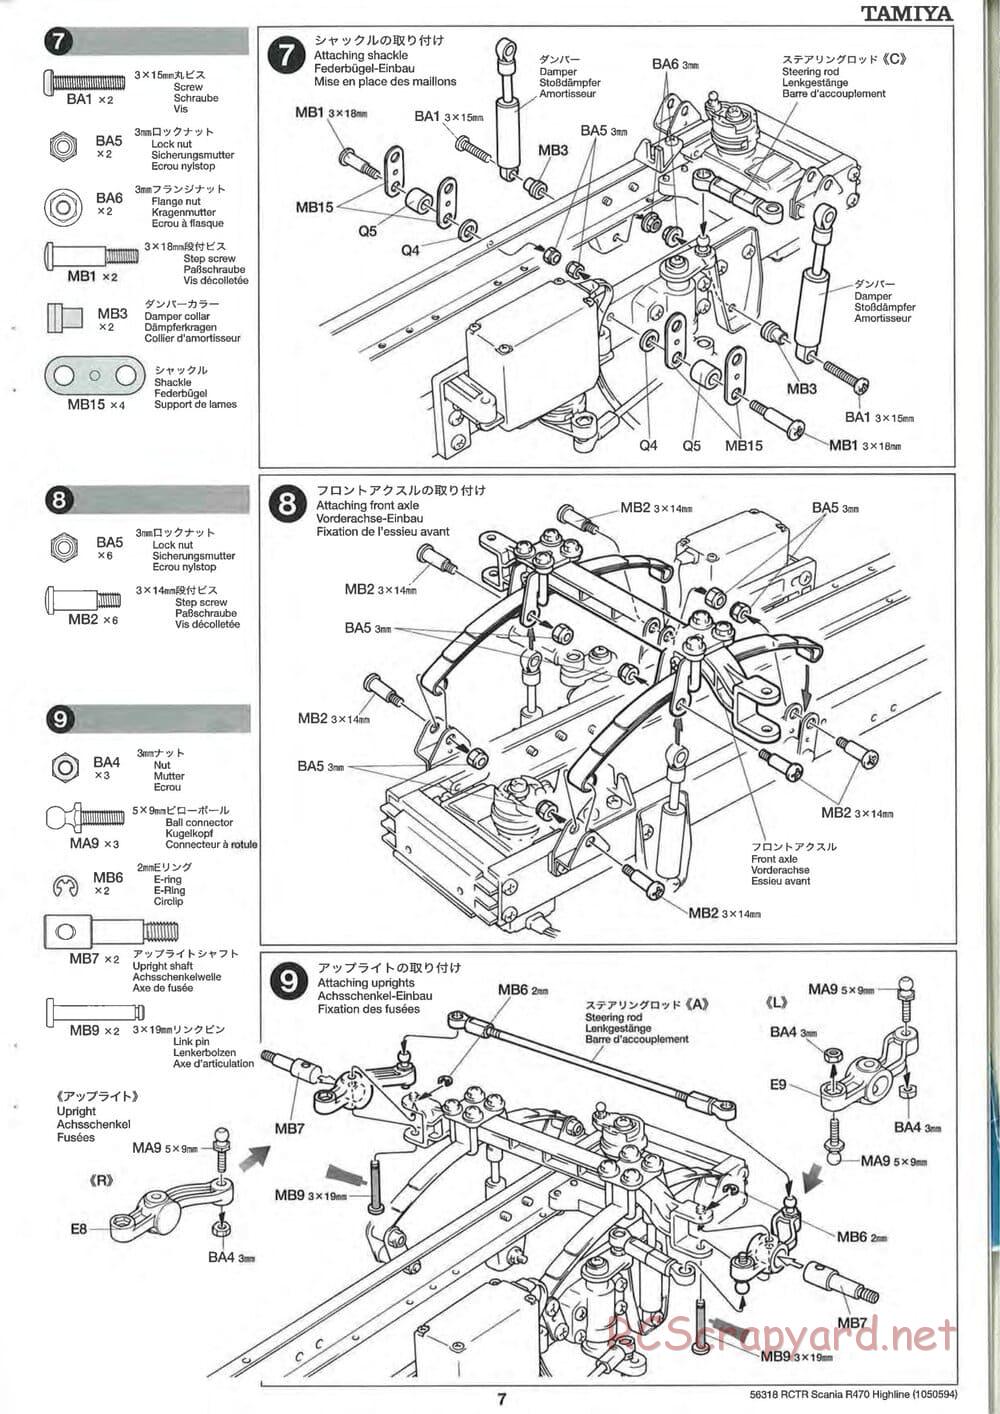 Tamiya - Scania R470 Highline Tractor Truck Chassis - Manual - Page 7